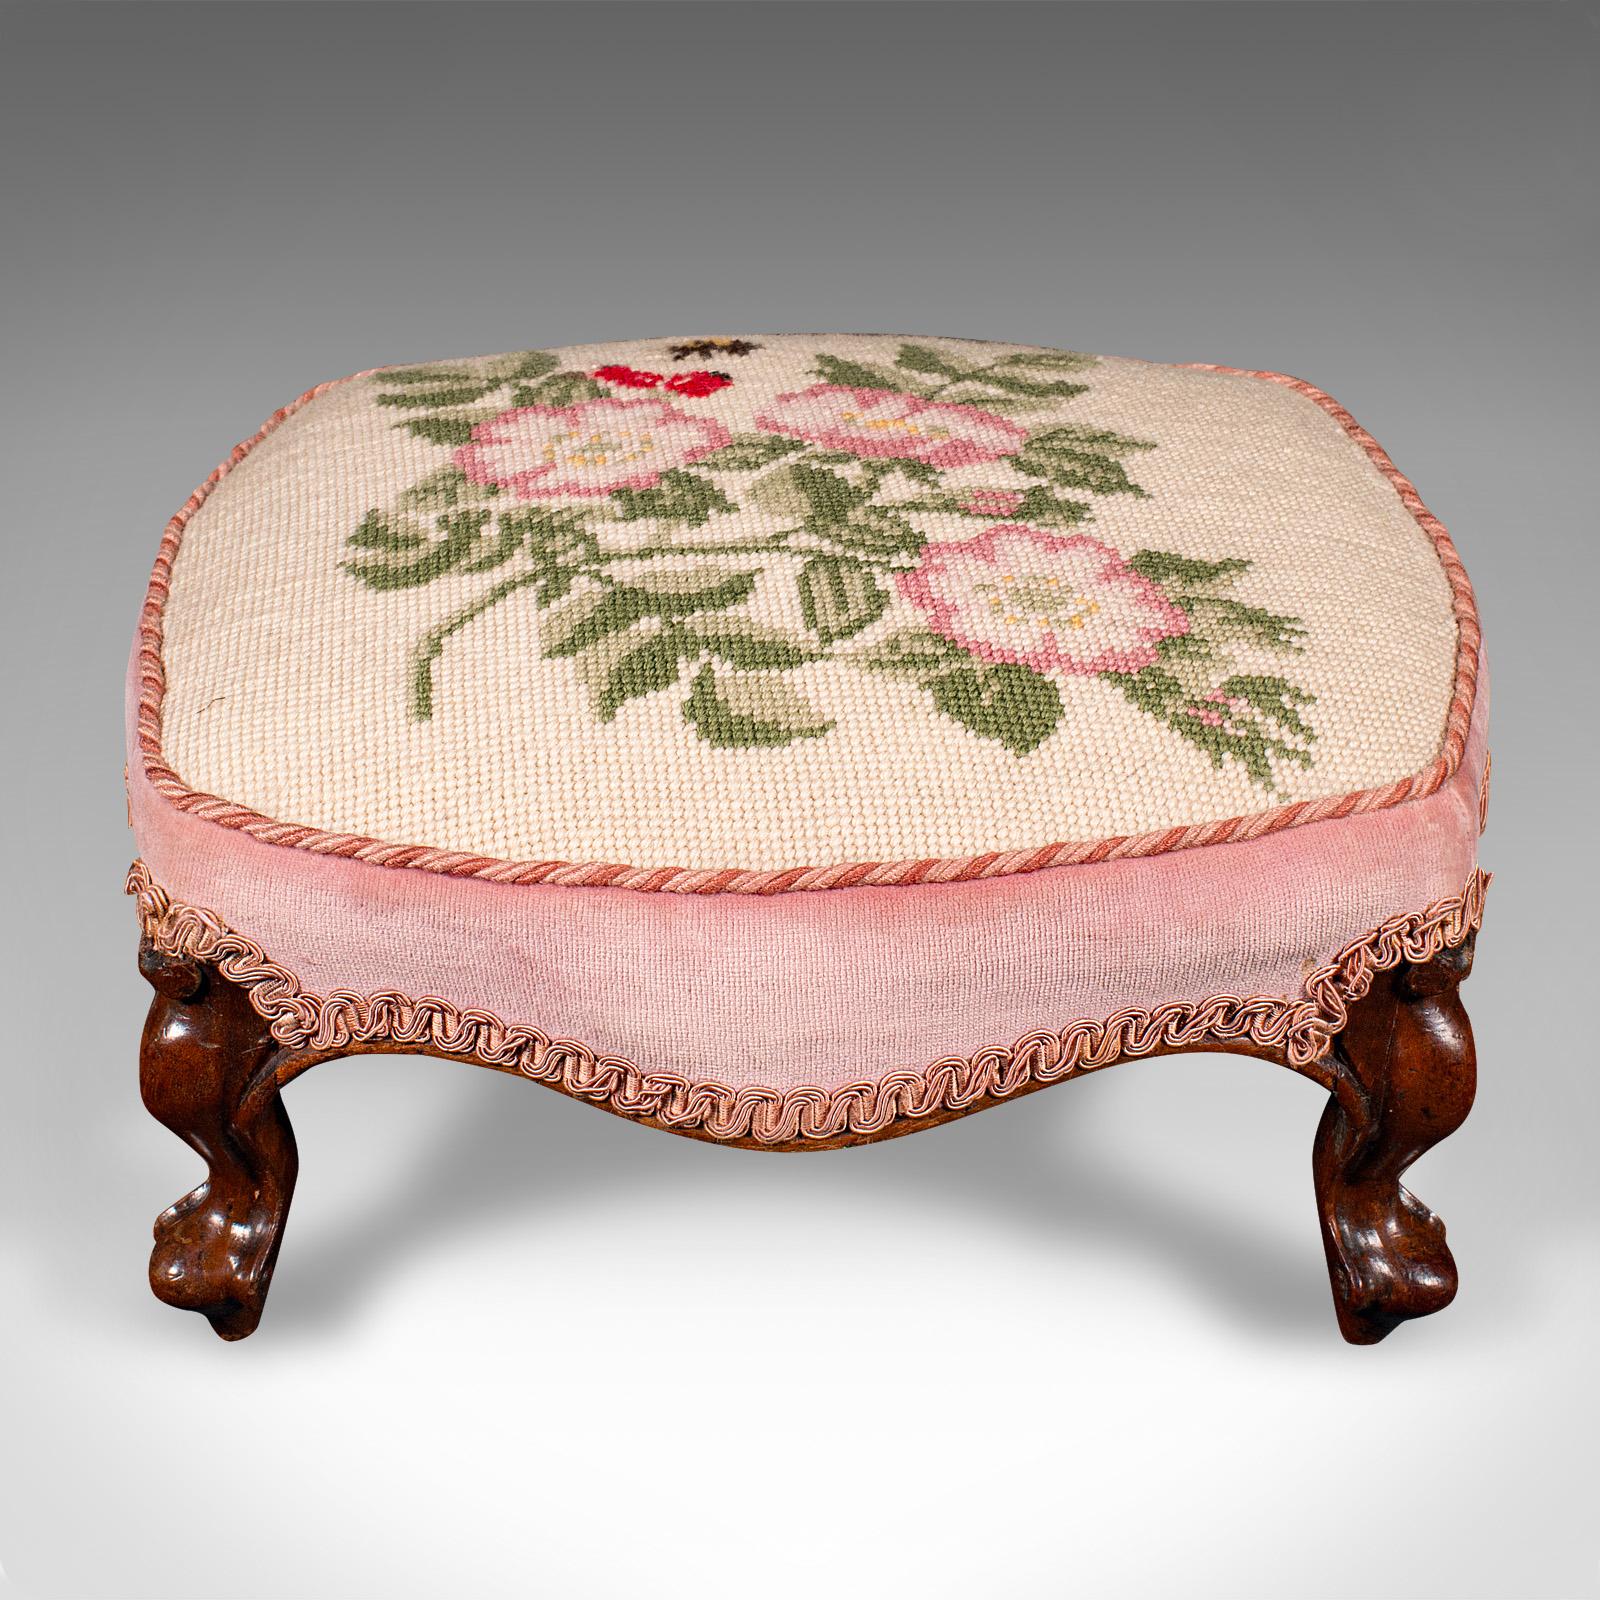 This is a small antique footstool. An English, walnut and embroidered textile low fireside footrest, dating to the early Victorian period, circa 1840.

Beautifully presented with a palette of attractive colours
Displaying a desirable aged patina and